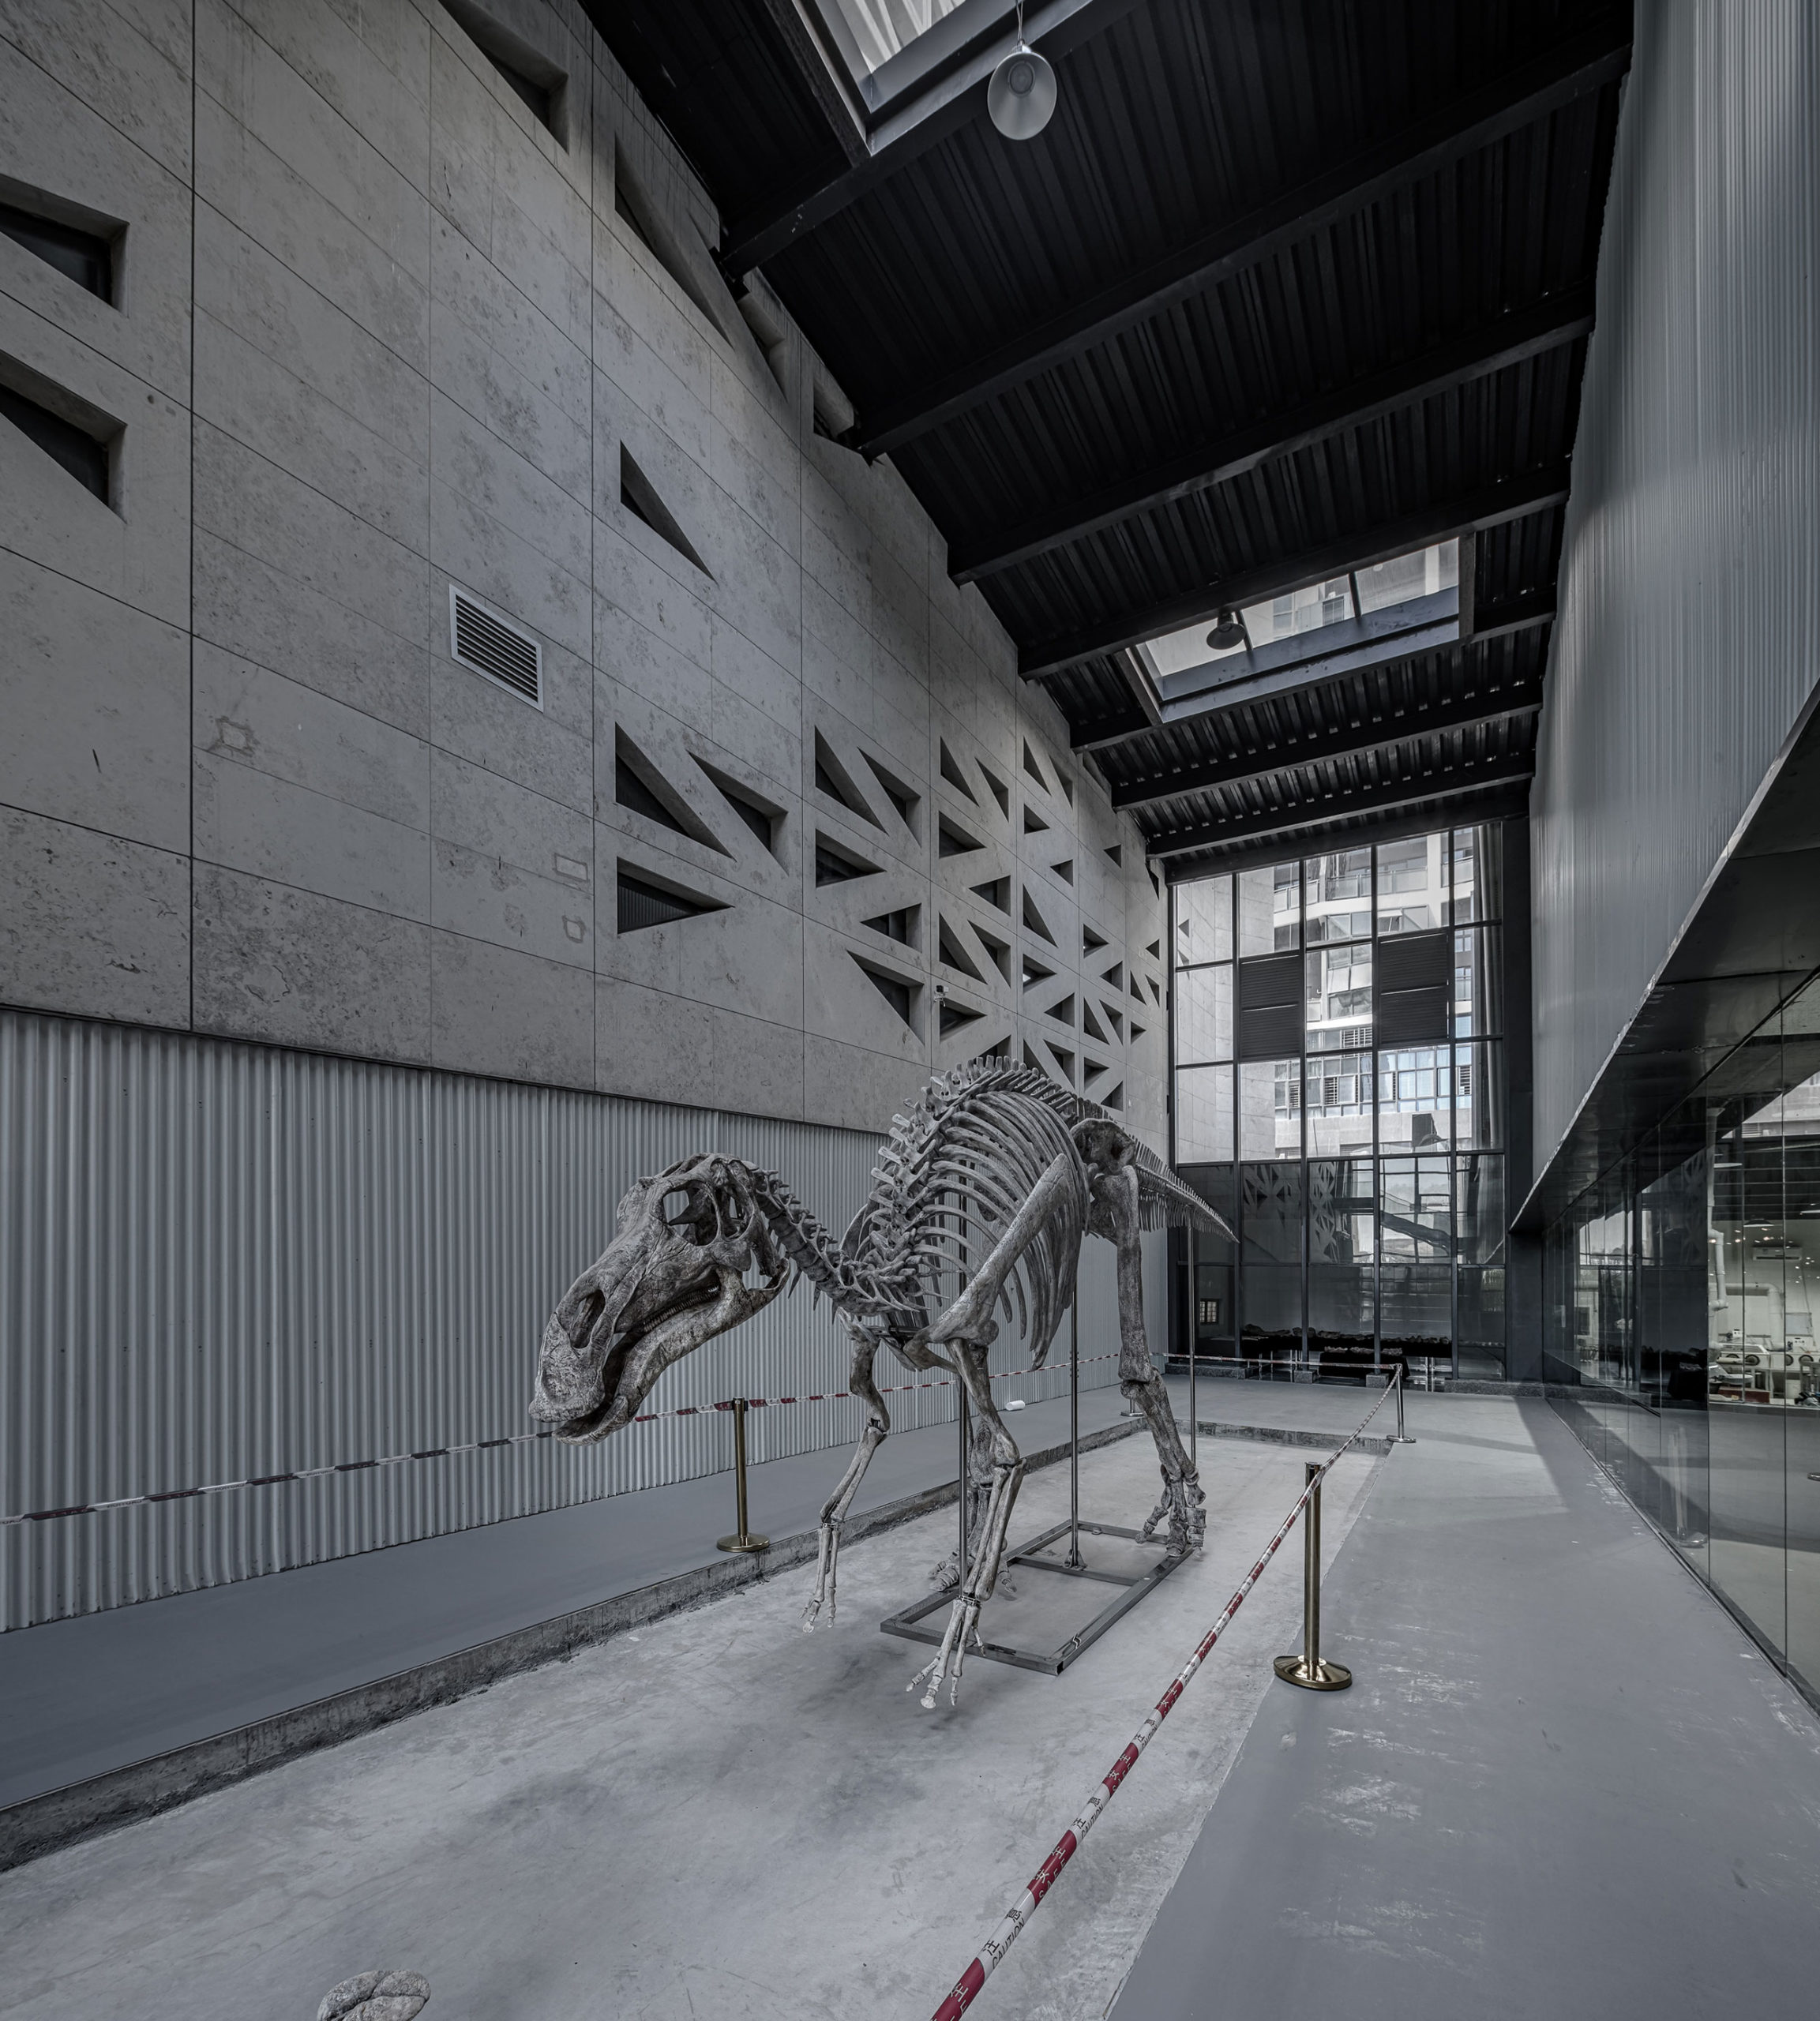 Yingliang Stone Natural History Museum. Architect: Atelier Alter Architects. Location: Xiamen, China. Photo: Atelier Alter Architects.